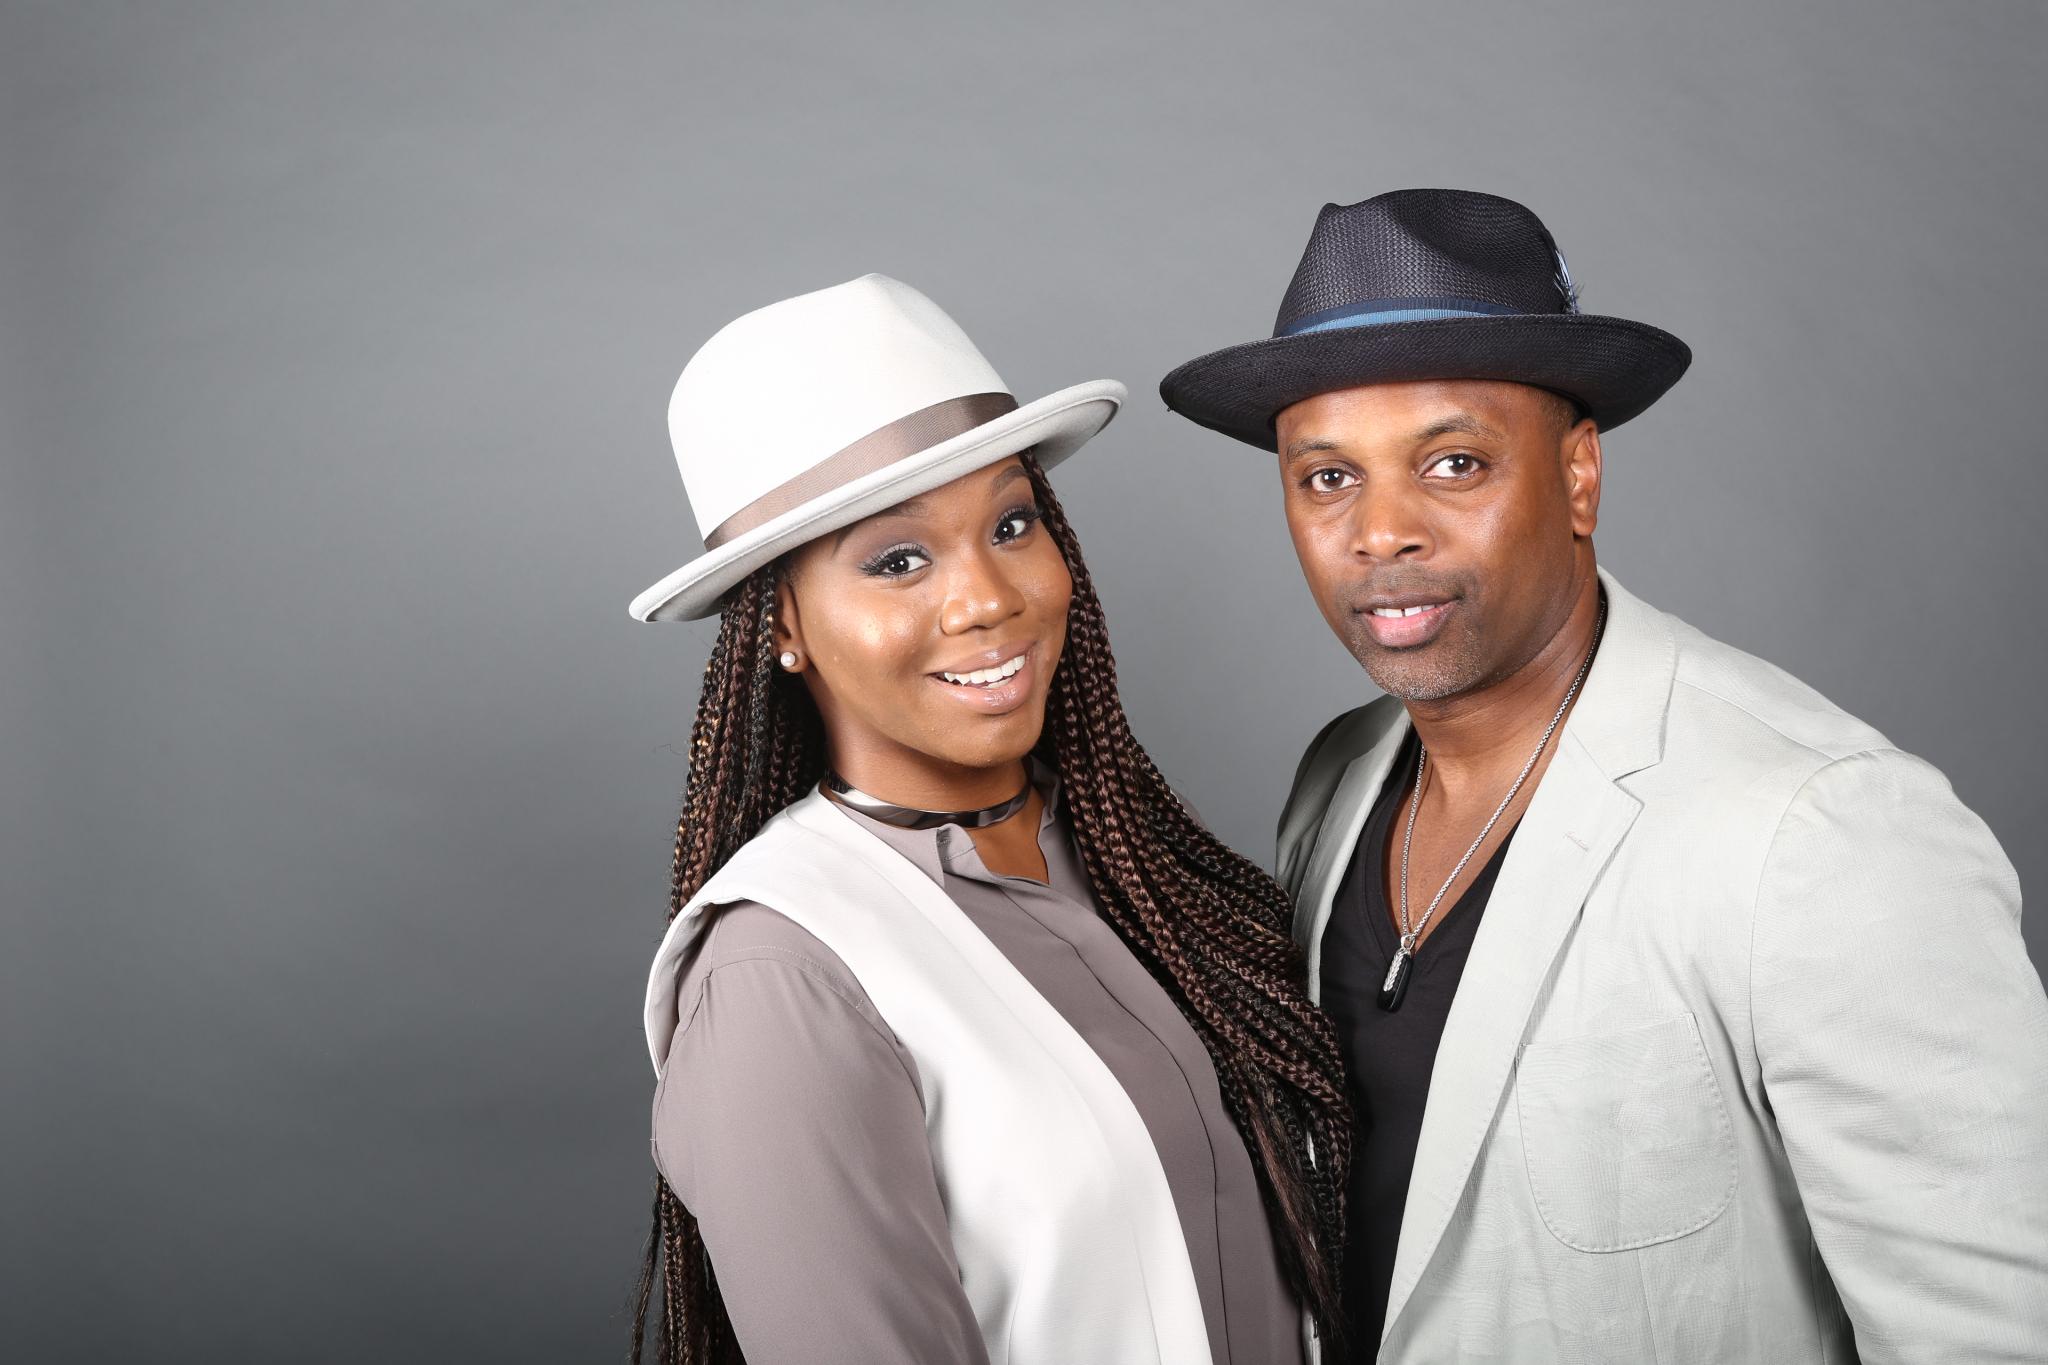 Sarah Jakes On The Moment She Knew Pastor Touré Roberts Was Her Soul Mate